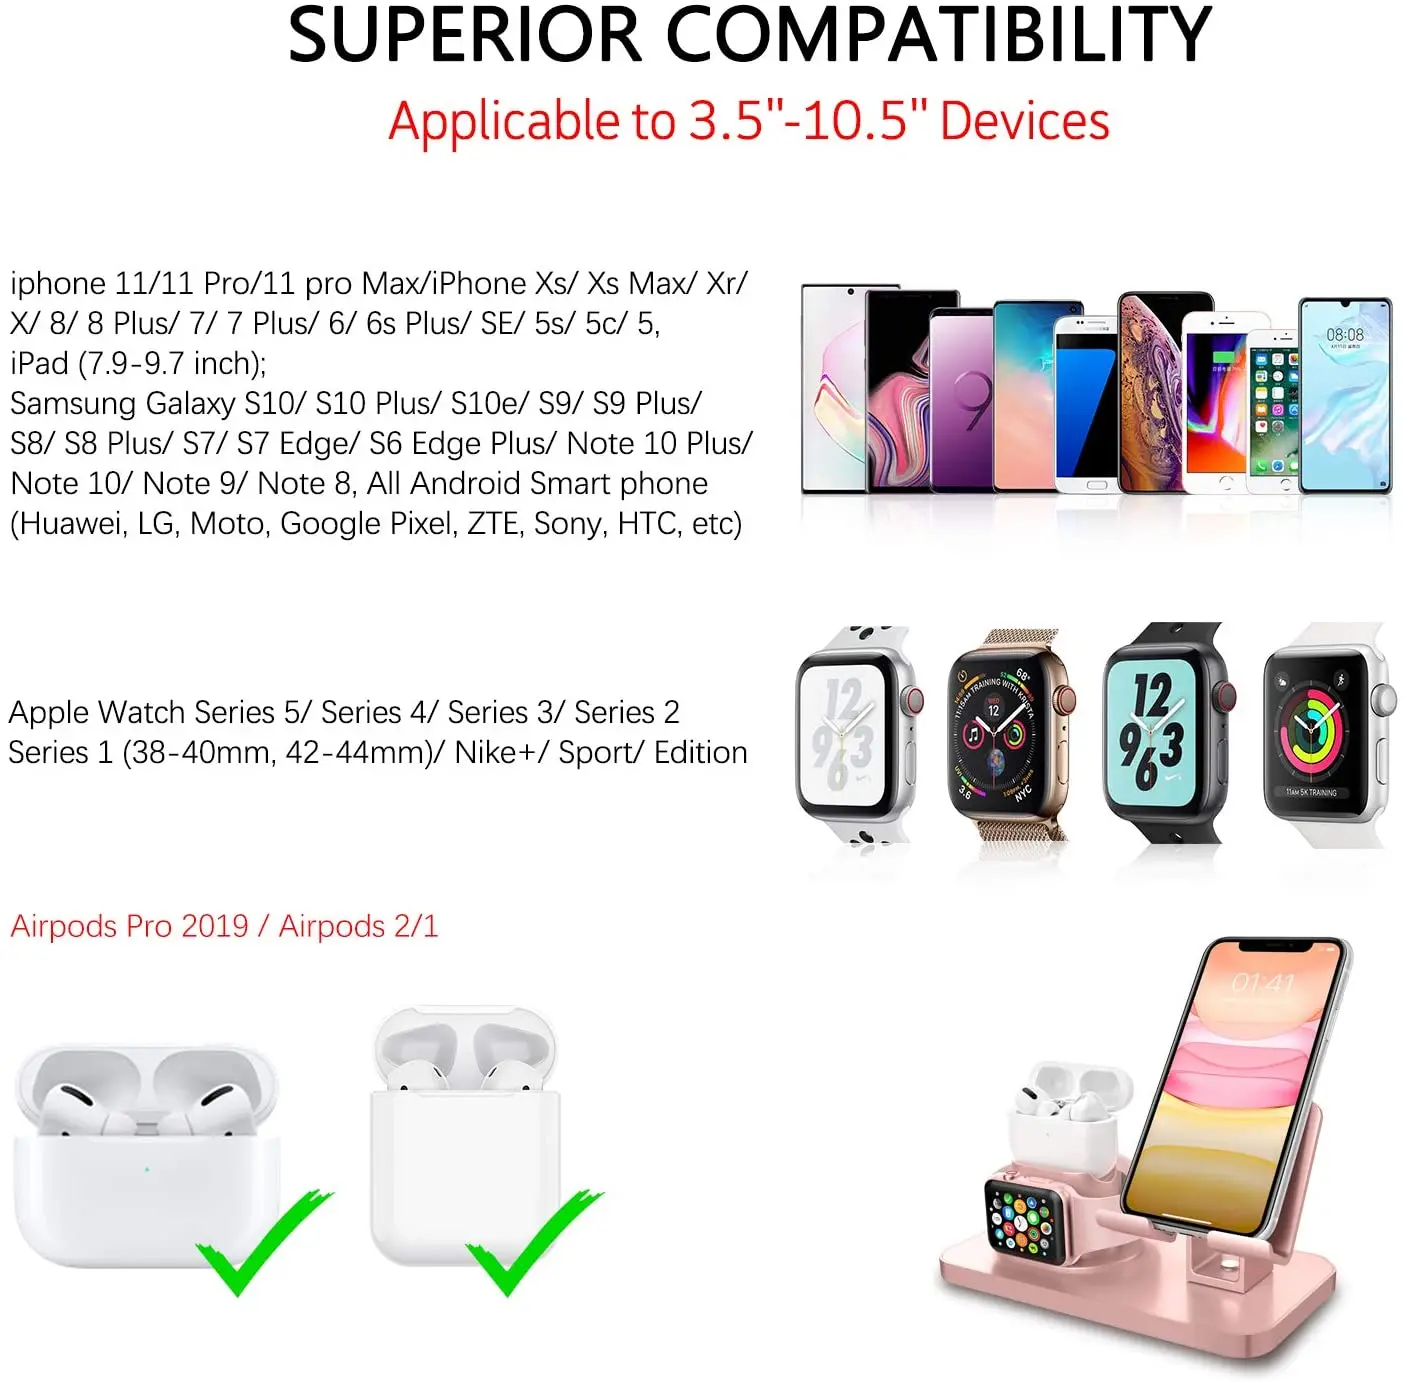 3 in 1 desktop phone charge dock holder for iphone 12 11 xs max ipad android phone tablet for airpods 12 pro apple watch stand free global shipping